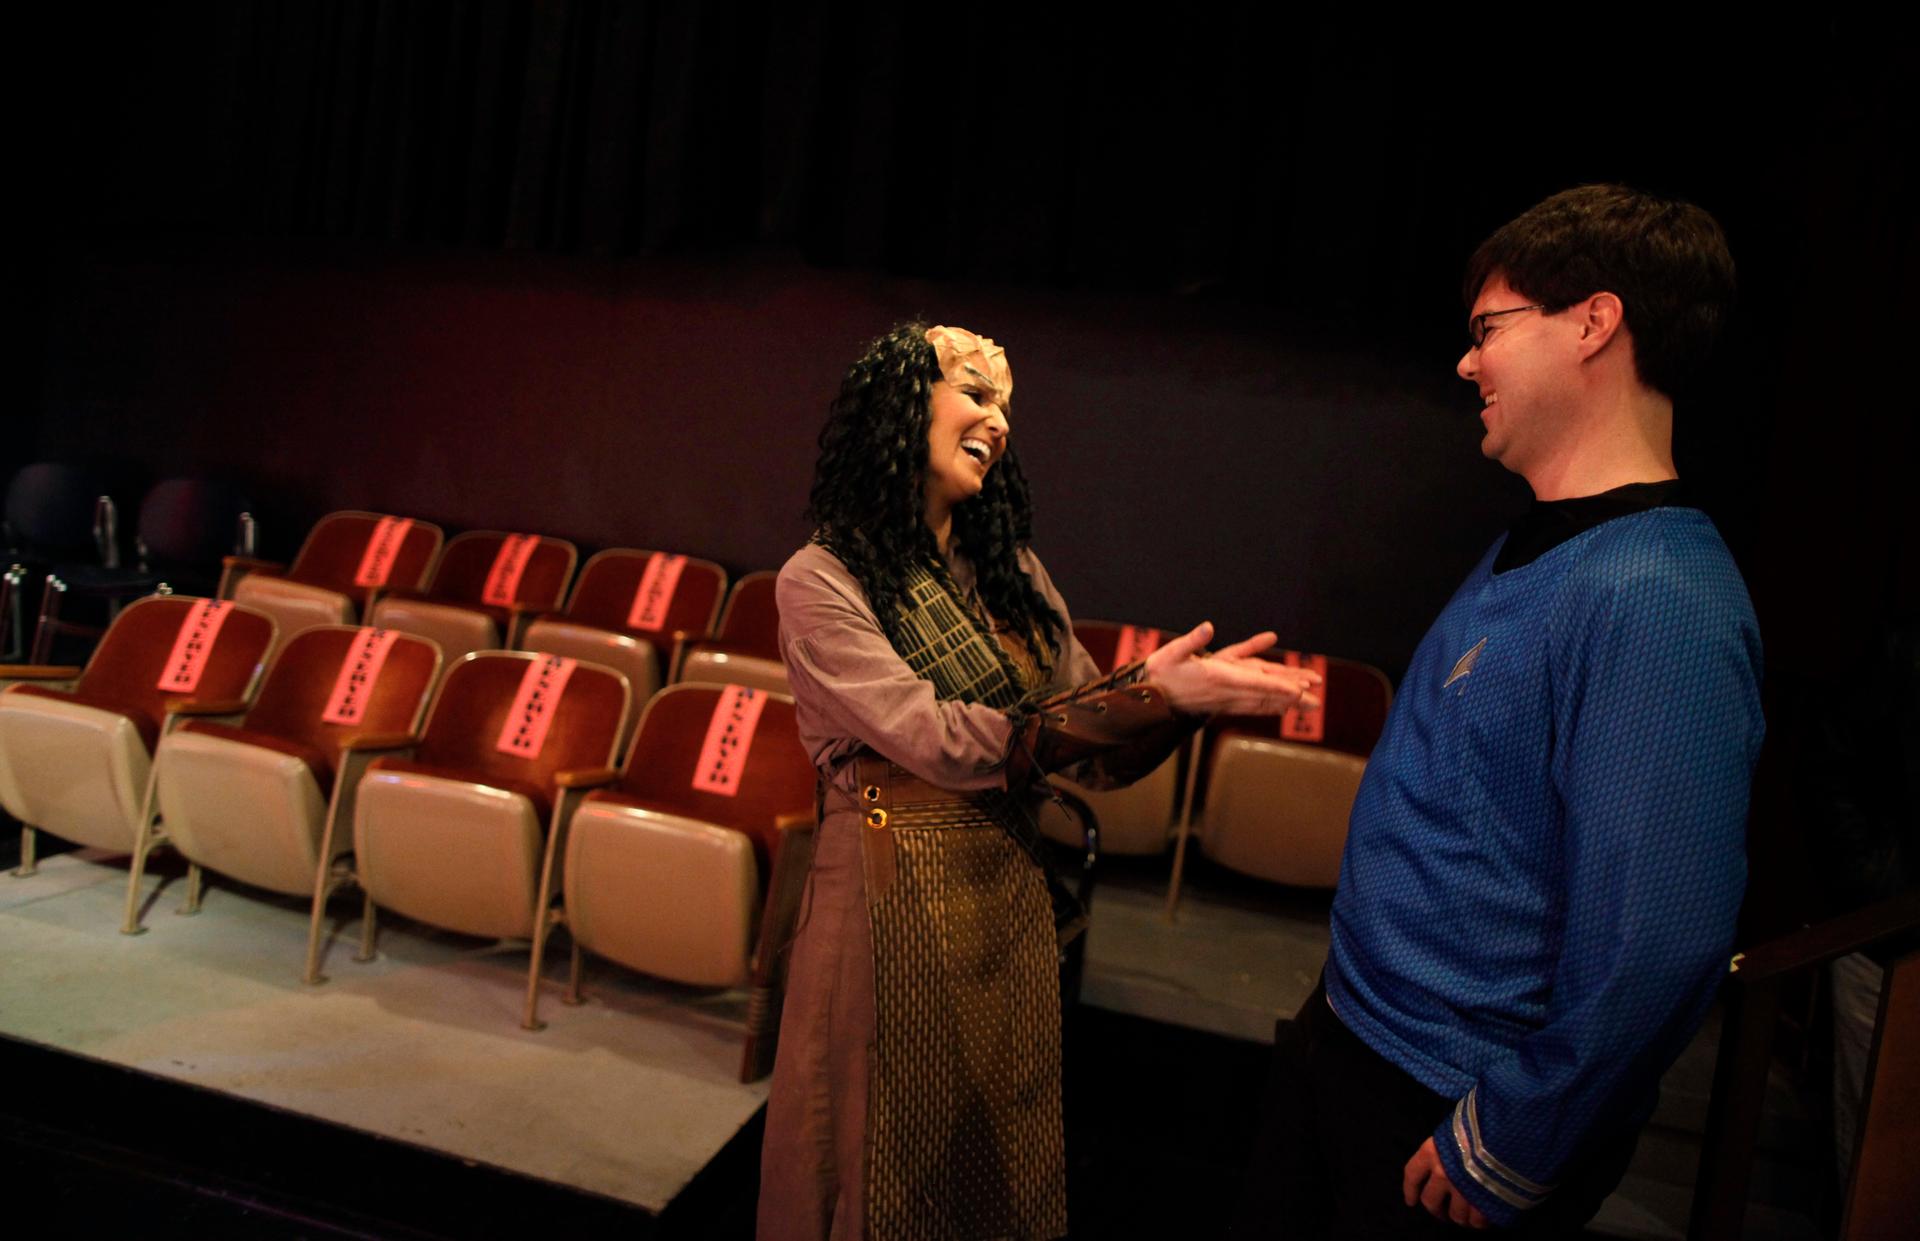 Performer Jacqueline Salamack (L) jokes with an audience member after a performance of "A Klingon Christmas Carol" in Chicago, December 20, 2012.